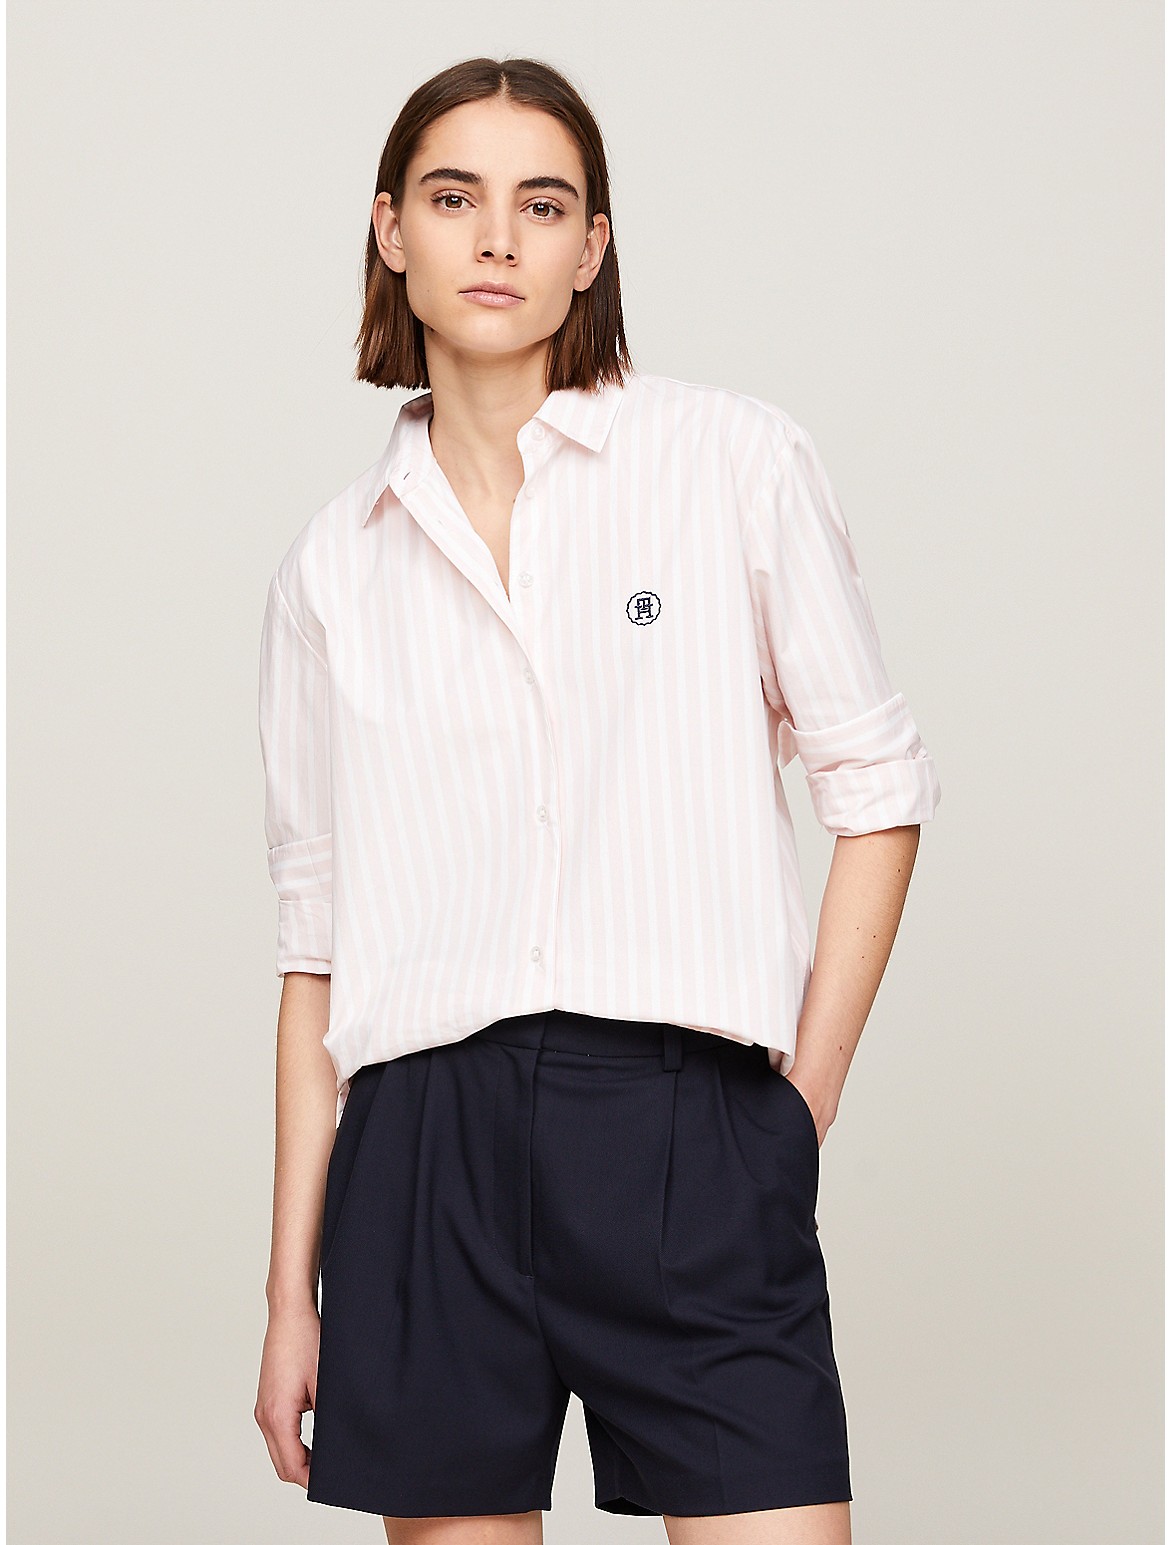 Tommy Hilfiger Women's Relaxed Fit TH Monogram Stripe Shirt